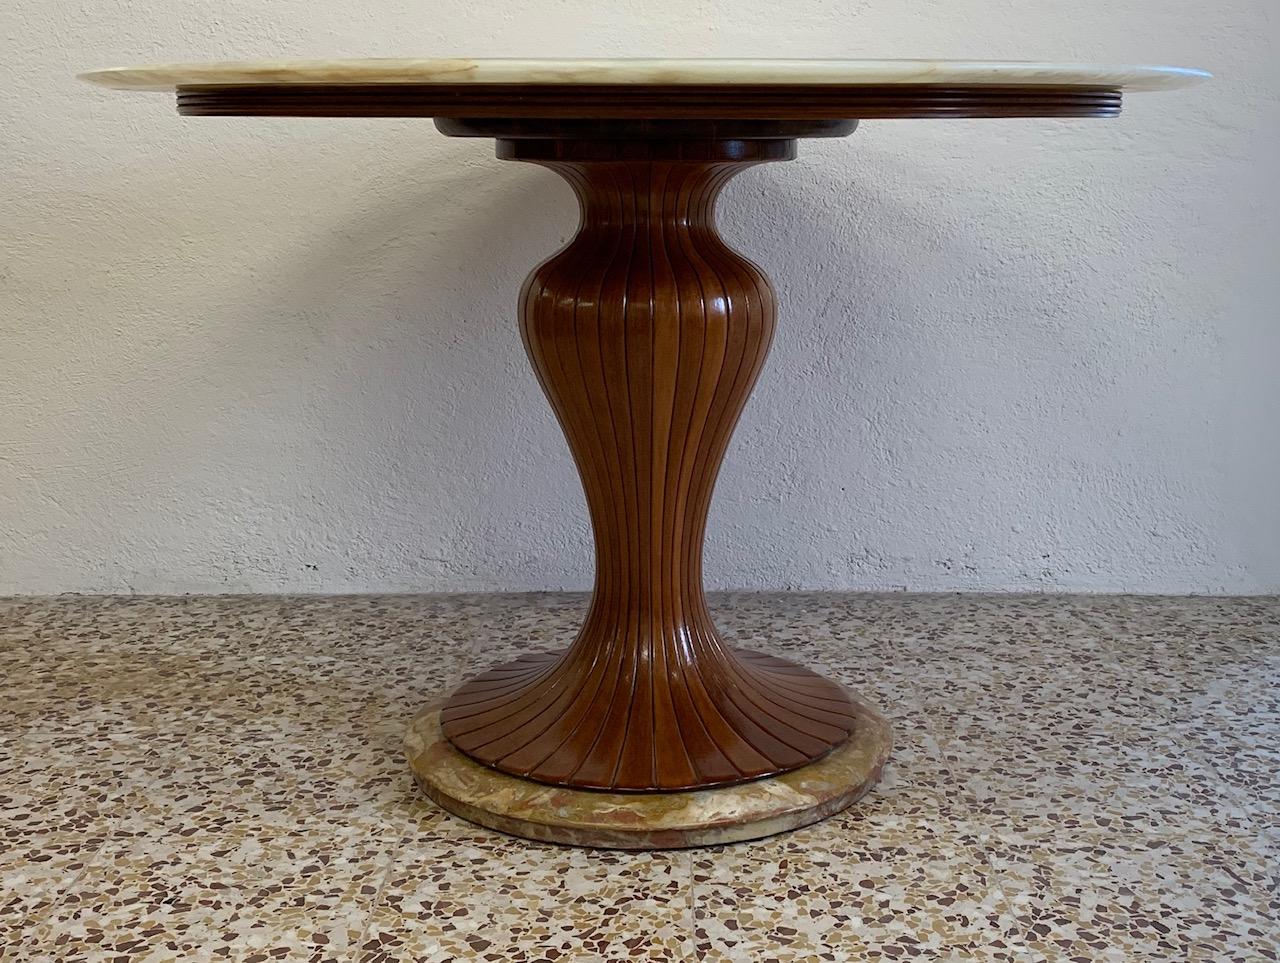 This table was produced in the 1950s in Italy.
The mahogany base has an elegant and sinuous classic shape of the design of Osvaldo Borsani.
The onyx top with its colors creates a unique spectacular effect.